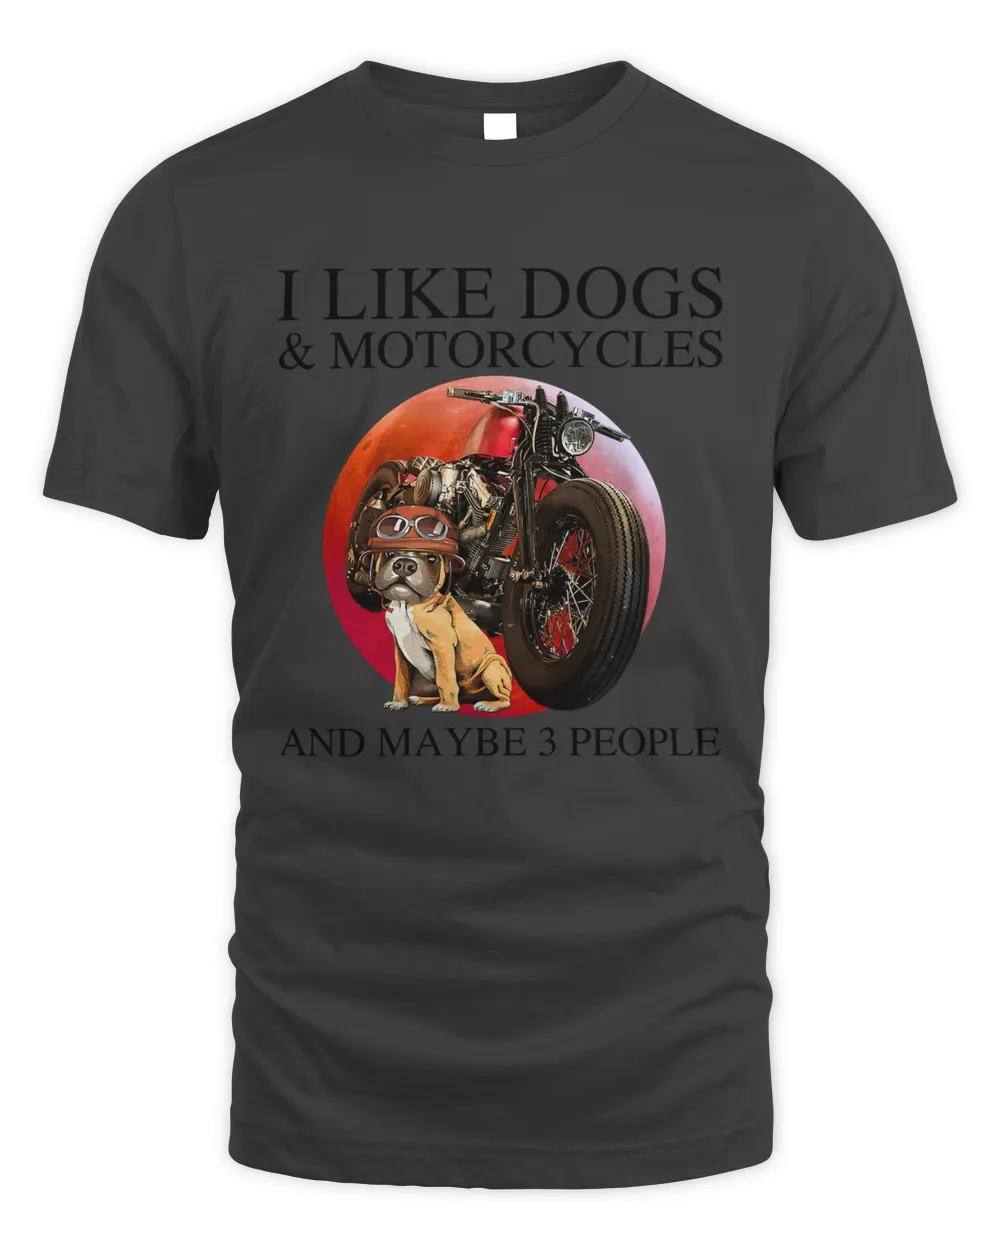 I Like Dogs & Motorcycles